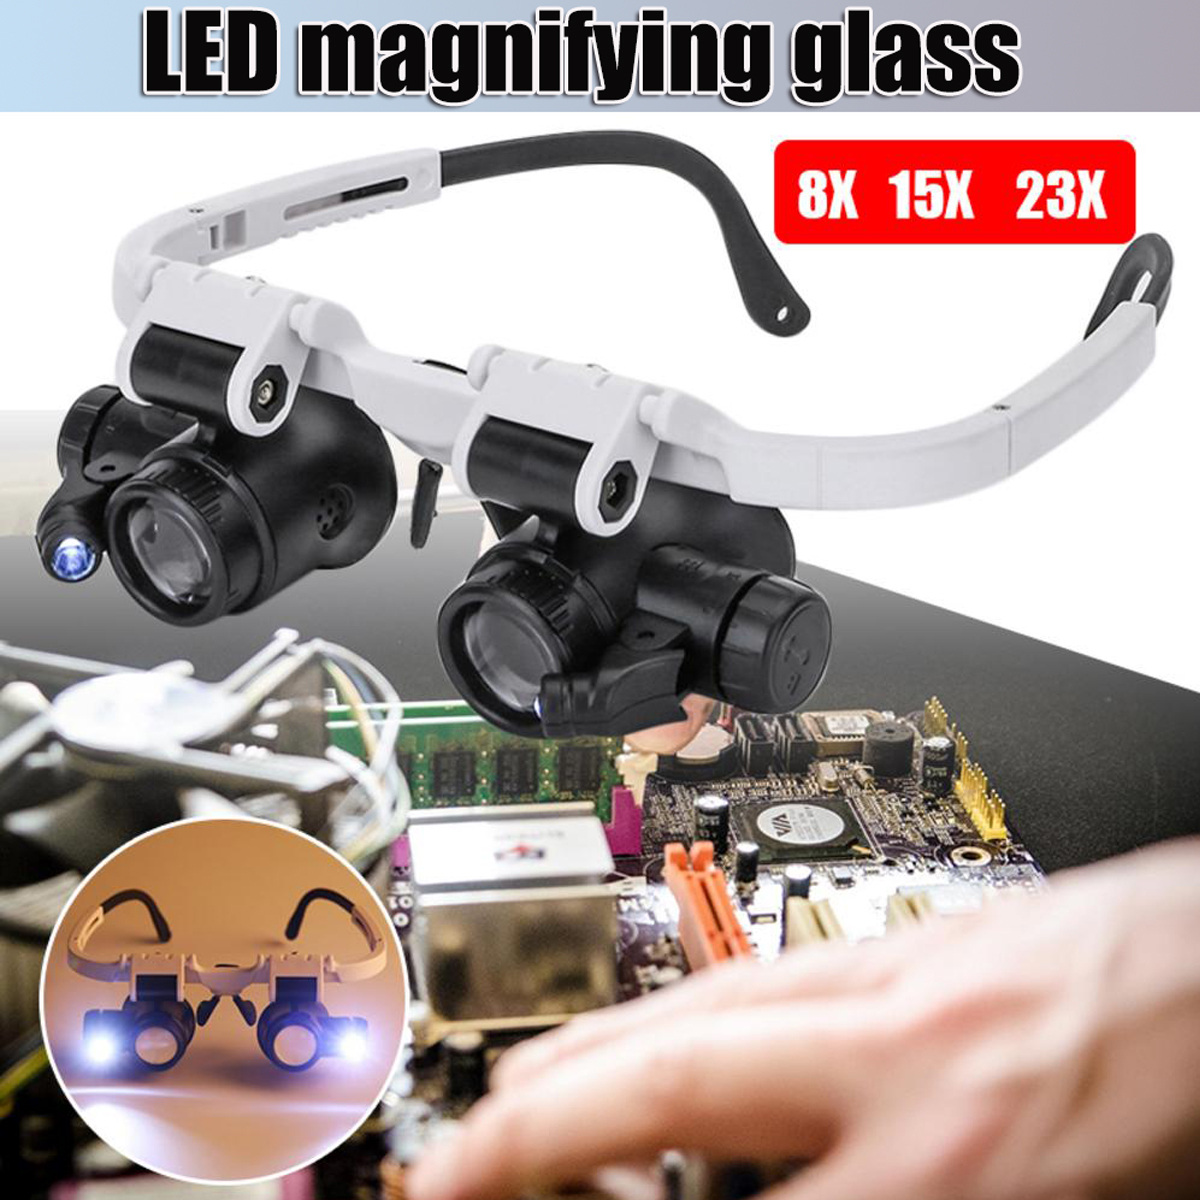 Headband-Head-Mounted-Repair-LED-Lamp-Light-Magnifying-Glass-Magnifier-Loupe-1623754-1